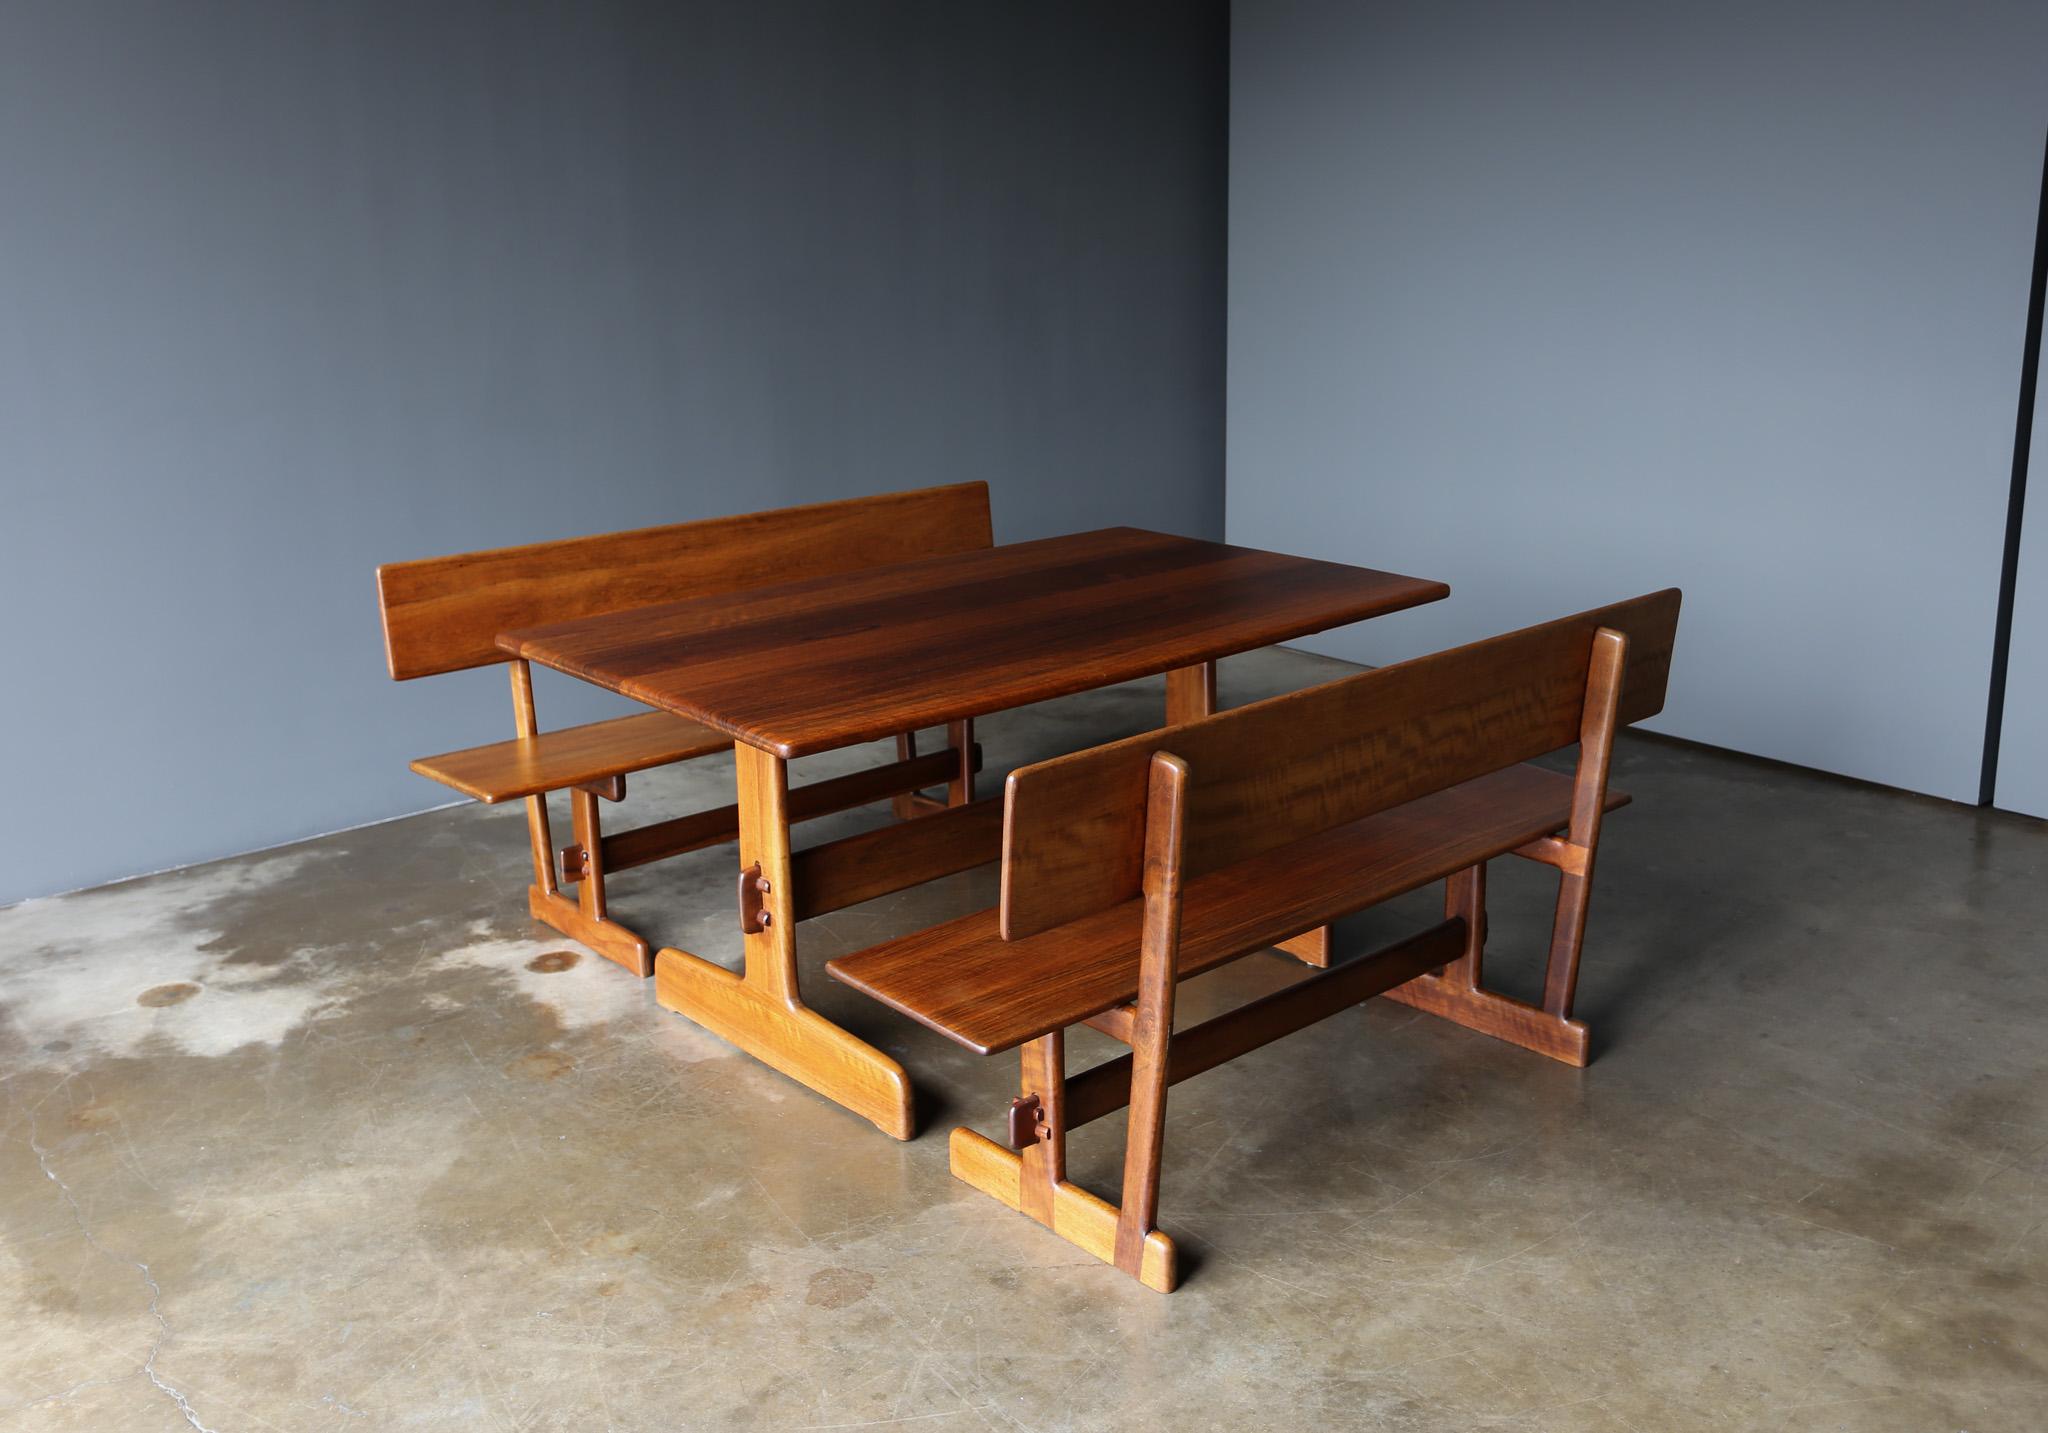 Gerald McCabe Shedua Trestle Dining Table & Benches, c.1980 In Good Condition For Sale In Costa Mesa, CA